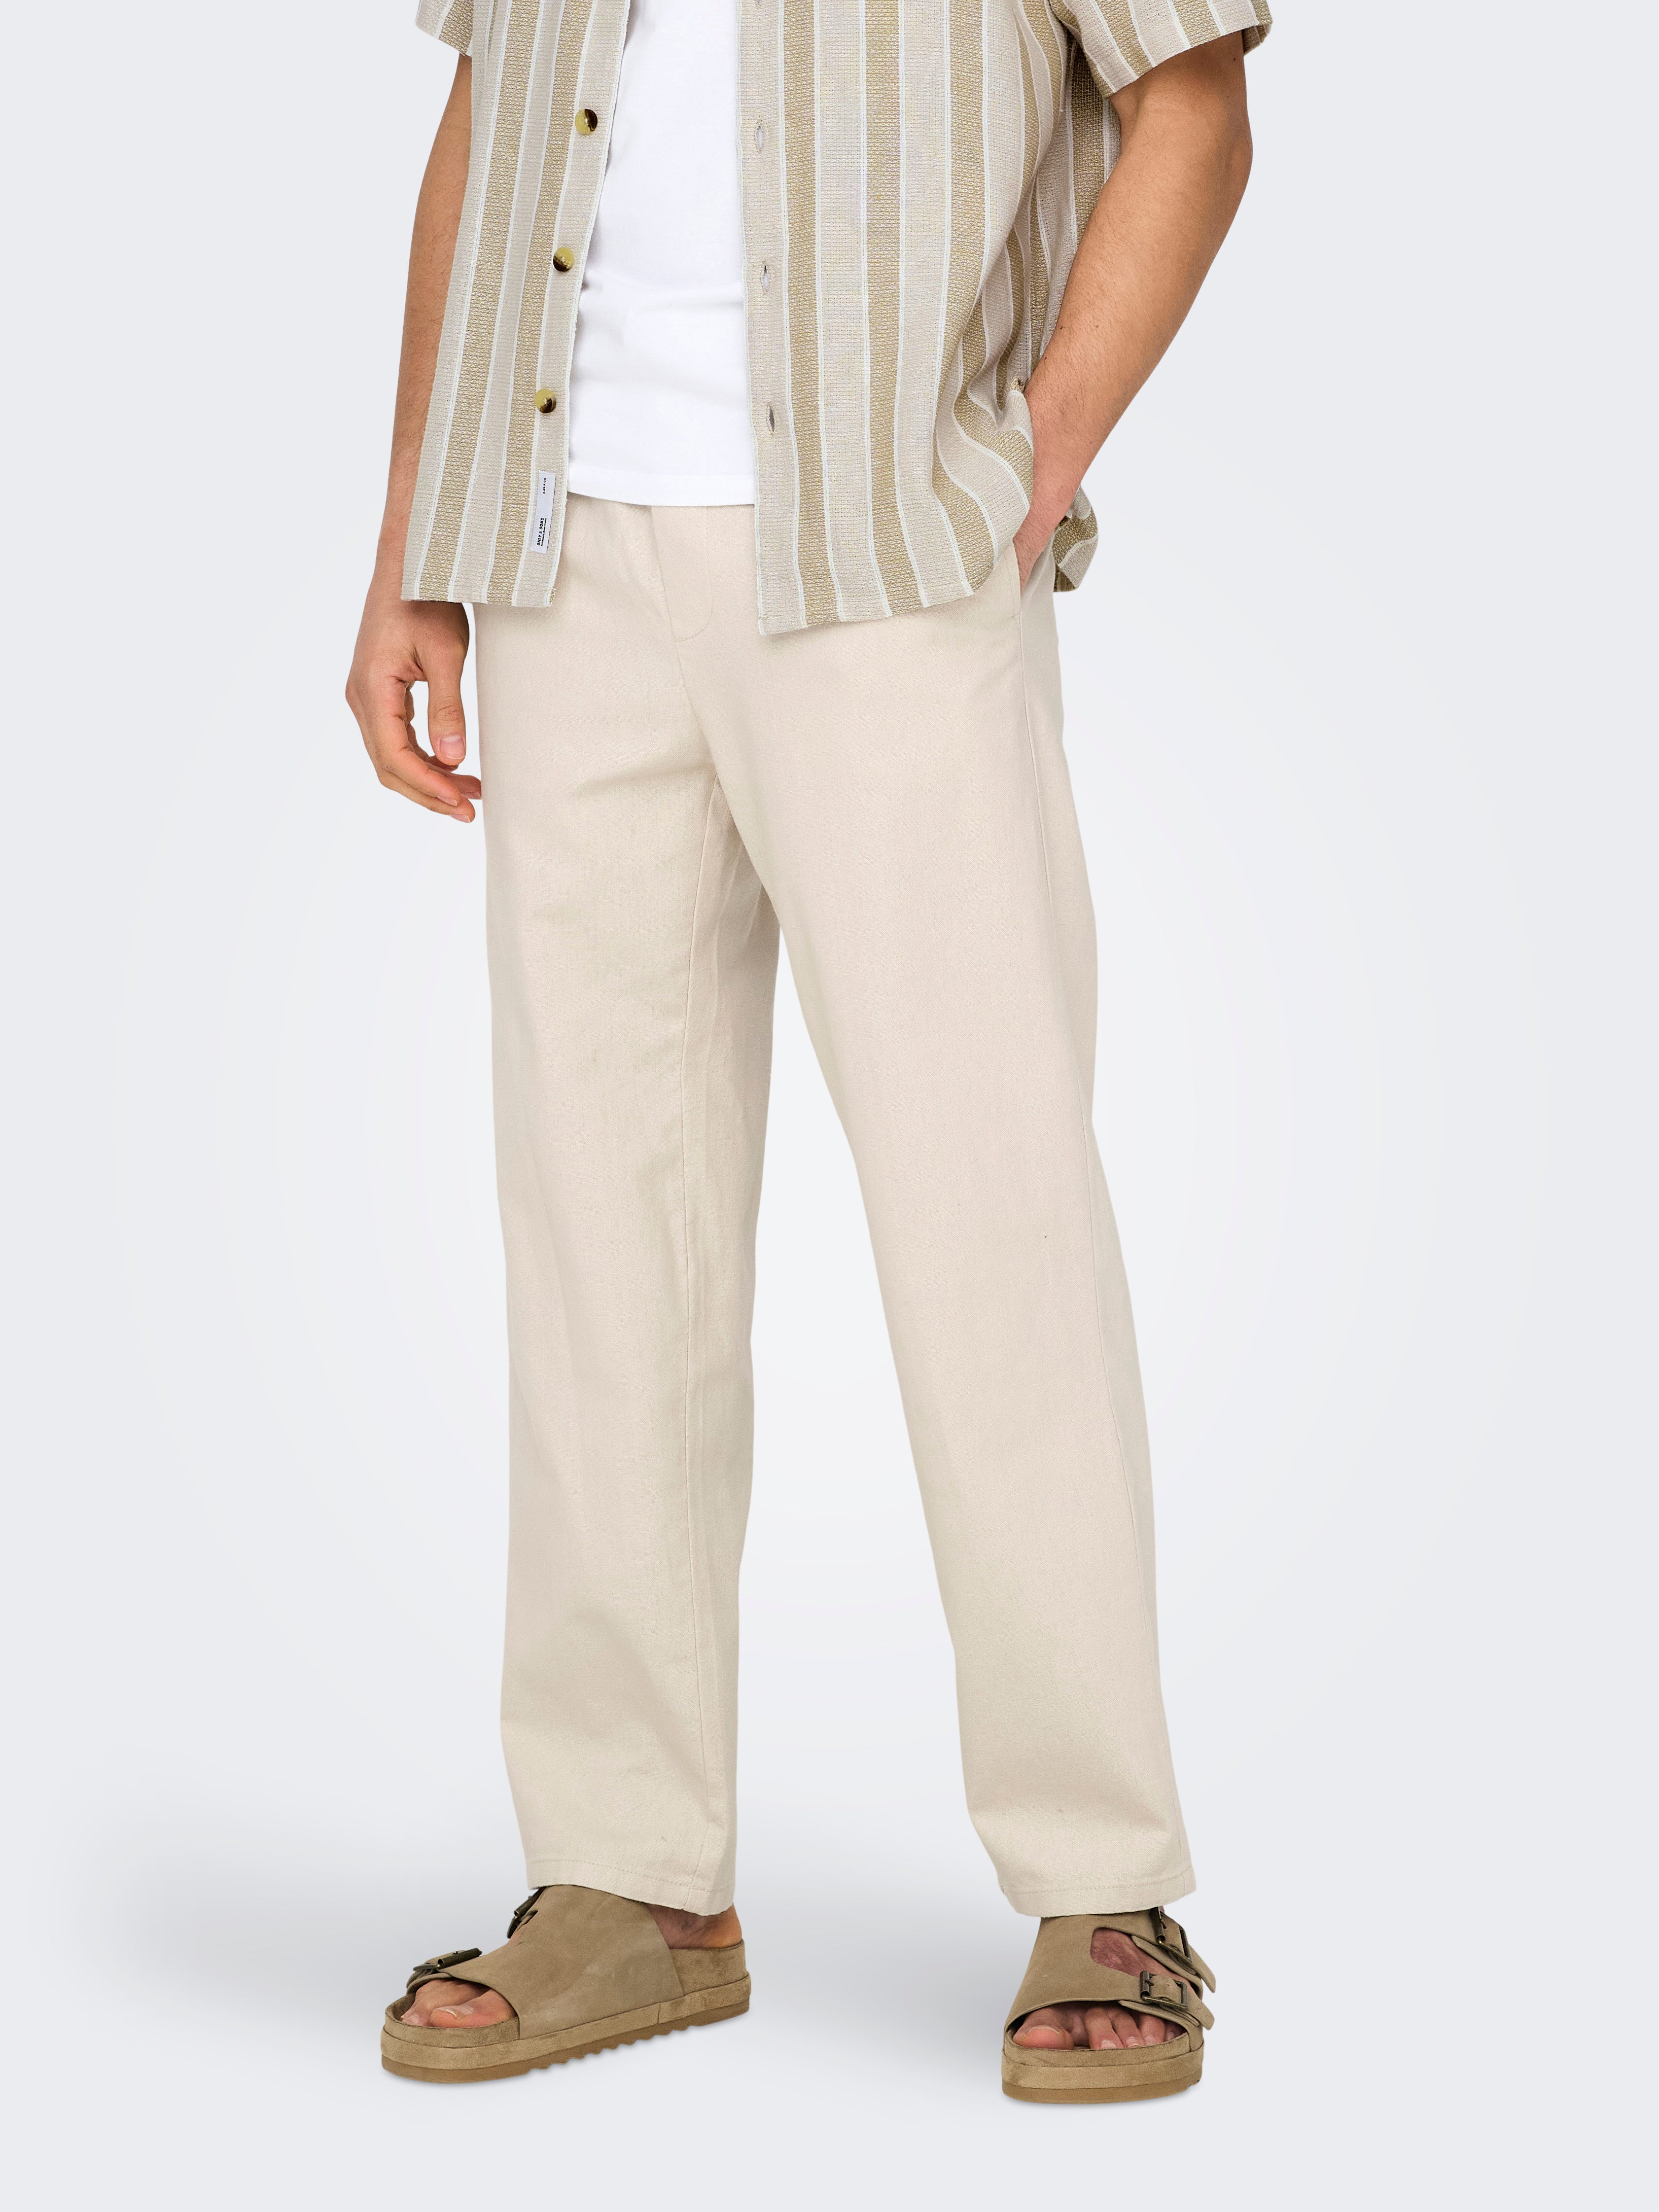 Loose Fitting Trousers | Loose Fit Trousers for Men | Trousers – newarabia